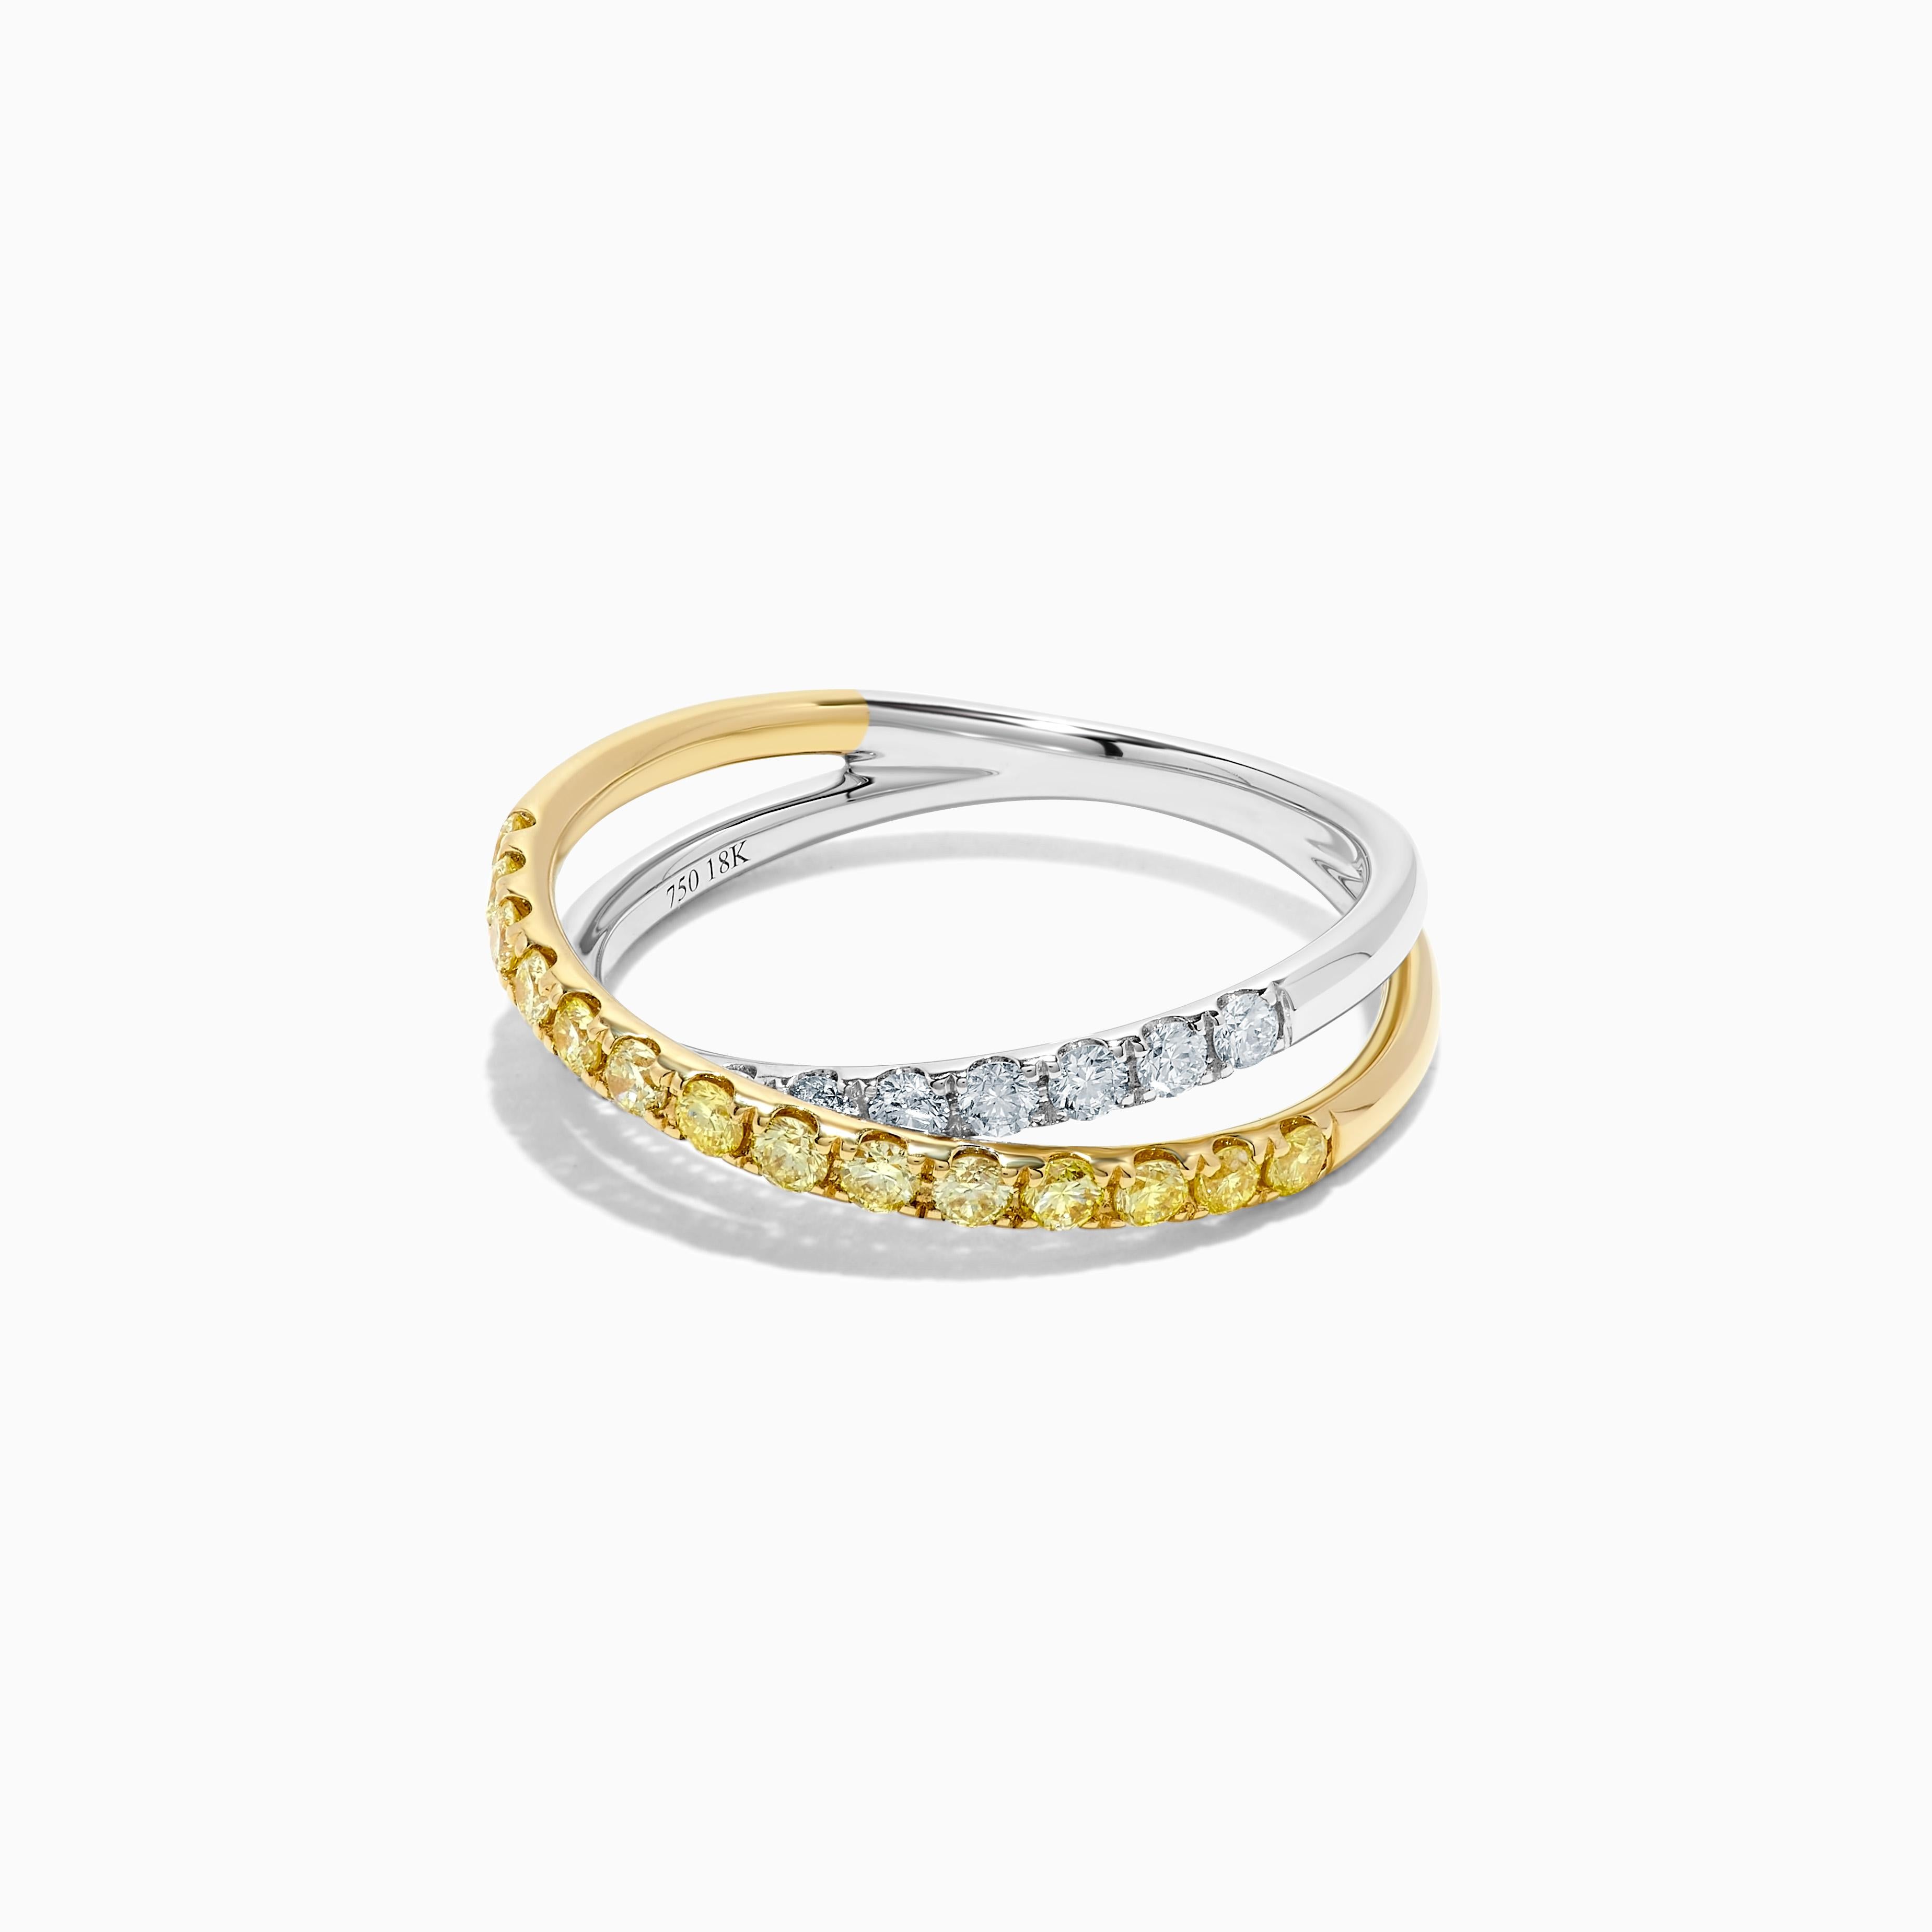 RareGemWorld's classic diamond band. Mounted in a beautiful 18K Yellow and White Gold setting with natural round yellow diamond melee complimented by natural round white diamond melee. This band is guaranteed to impress and enhance your personal